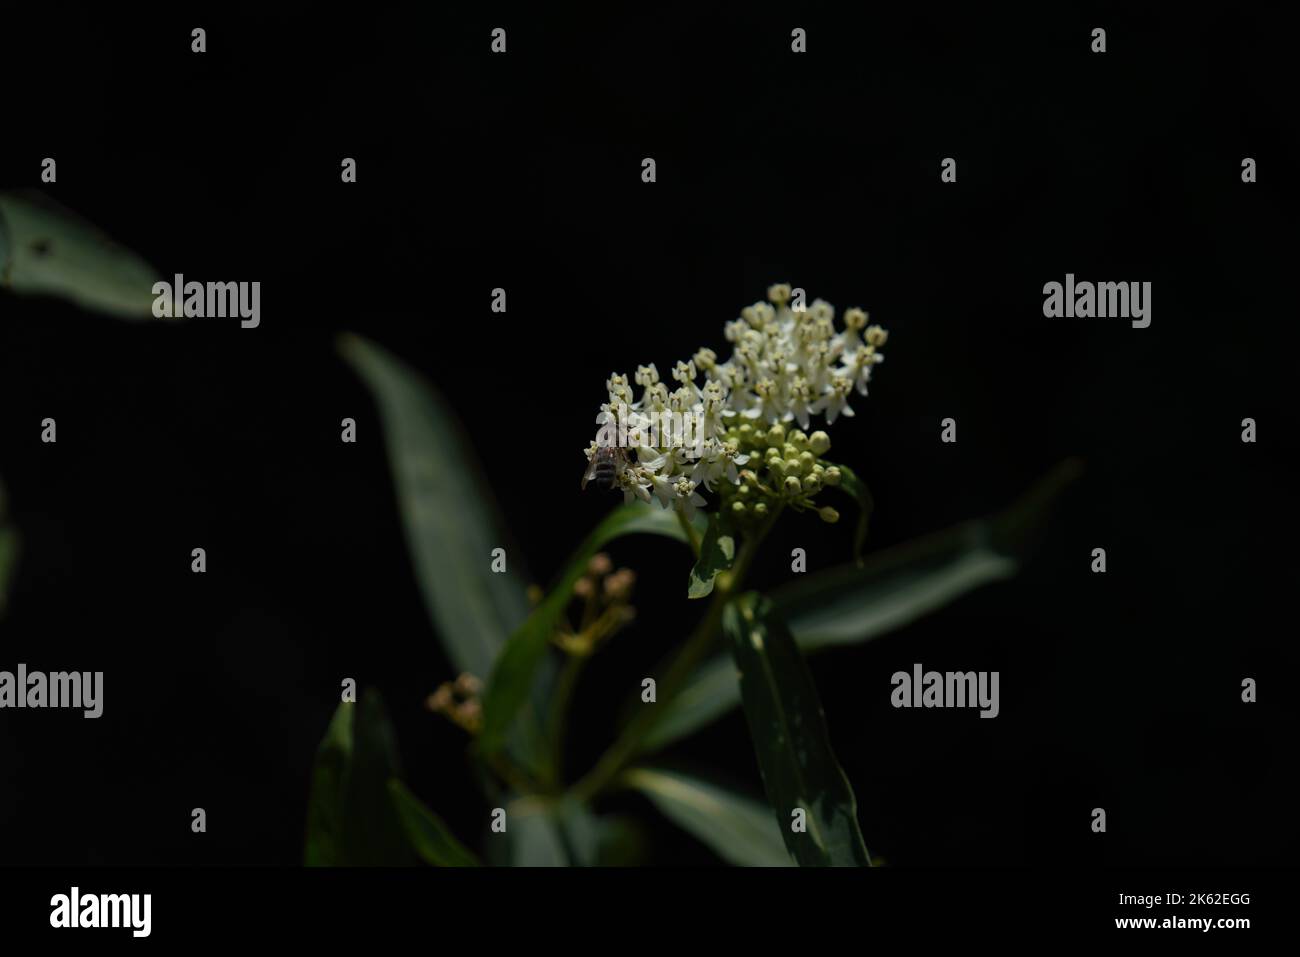 A closeup of Asclepias verticillata, the whorled milkweed on black background. Stock Photo